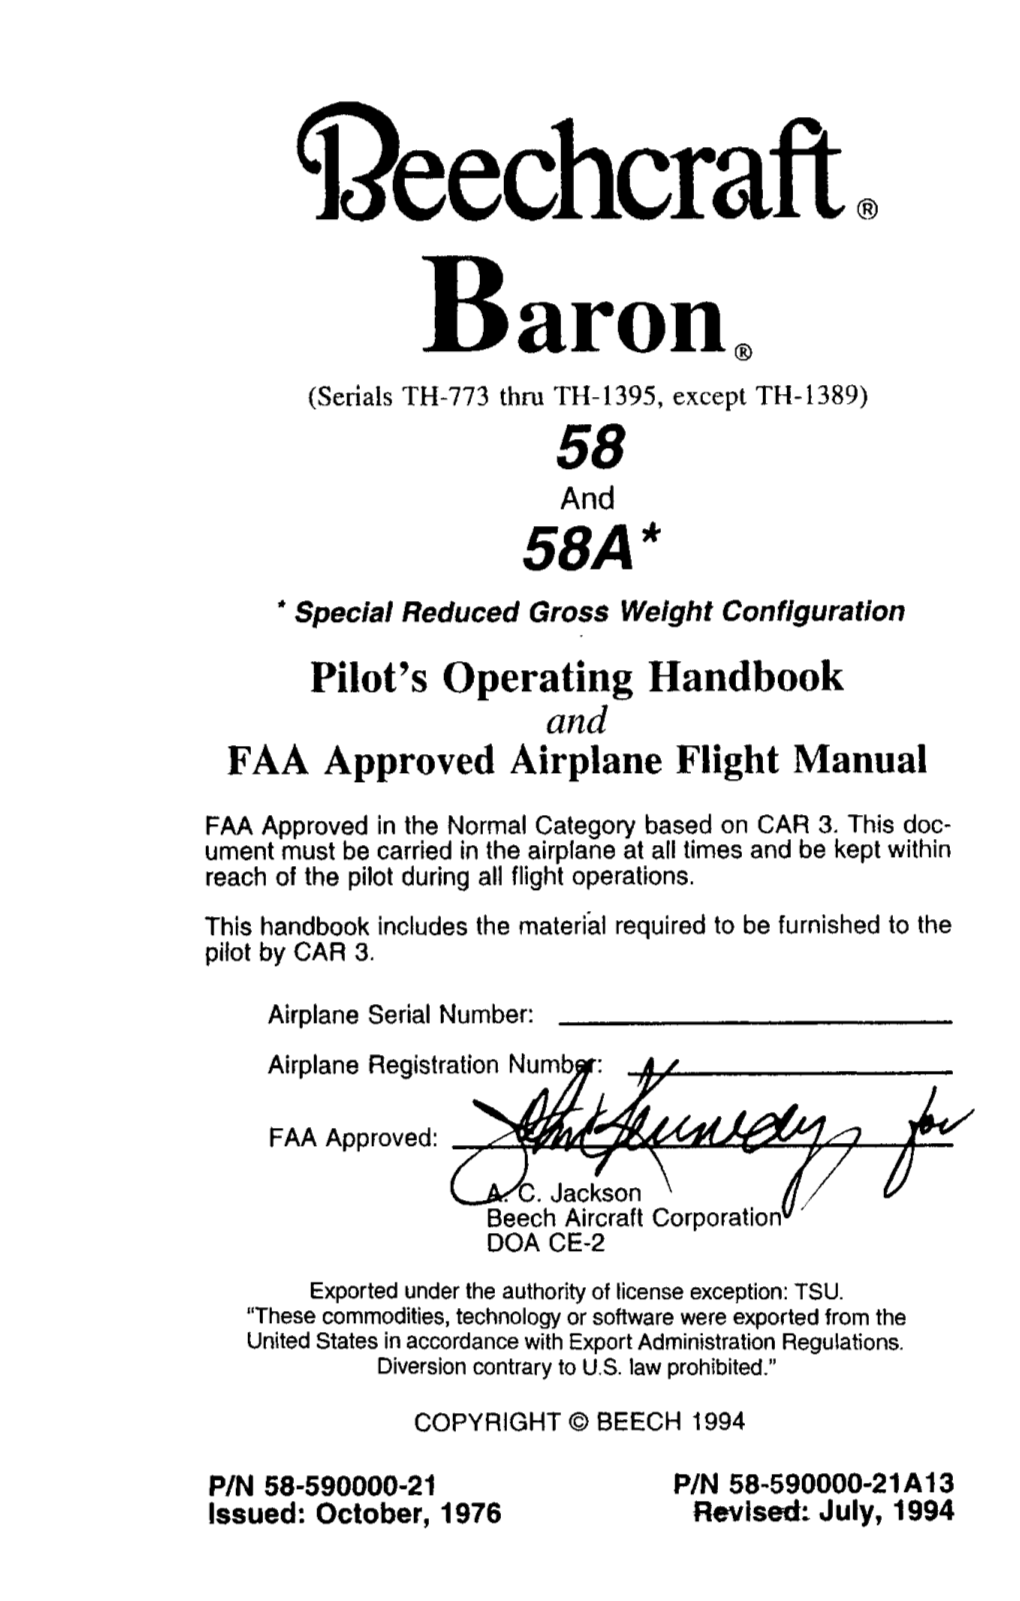 BARON 58 and S8A (TH-773 THRU TH-1395, EXCEPT TH-1389) PILOT's OPERATING HANDBOOK and FAA APPROVED AIRPLANE FLIGHT MANUAL A13 Revision July, 1994